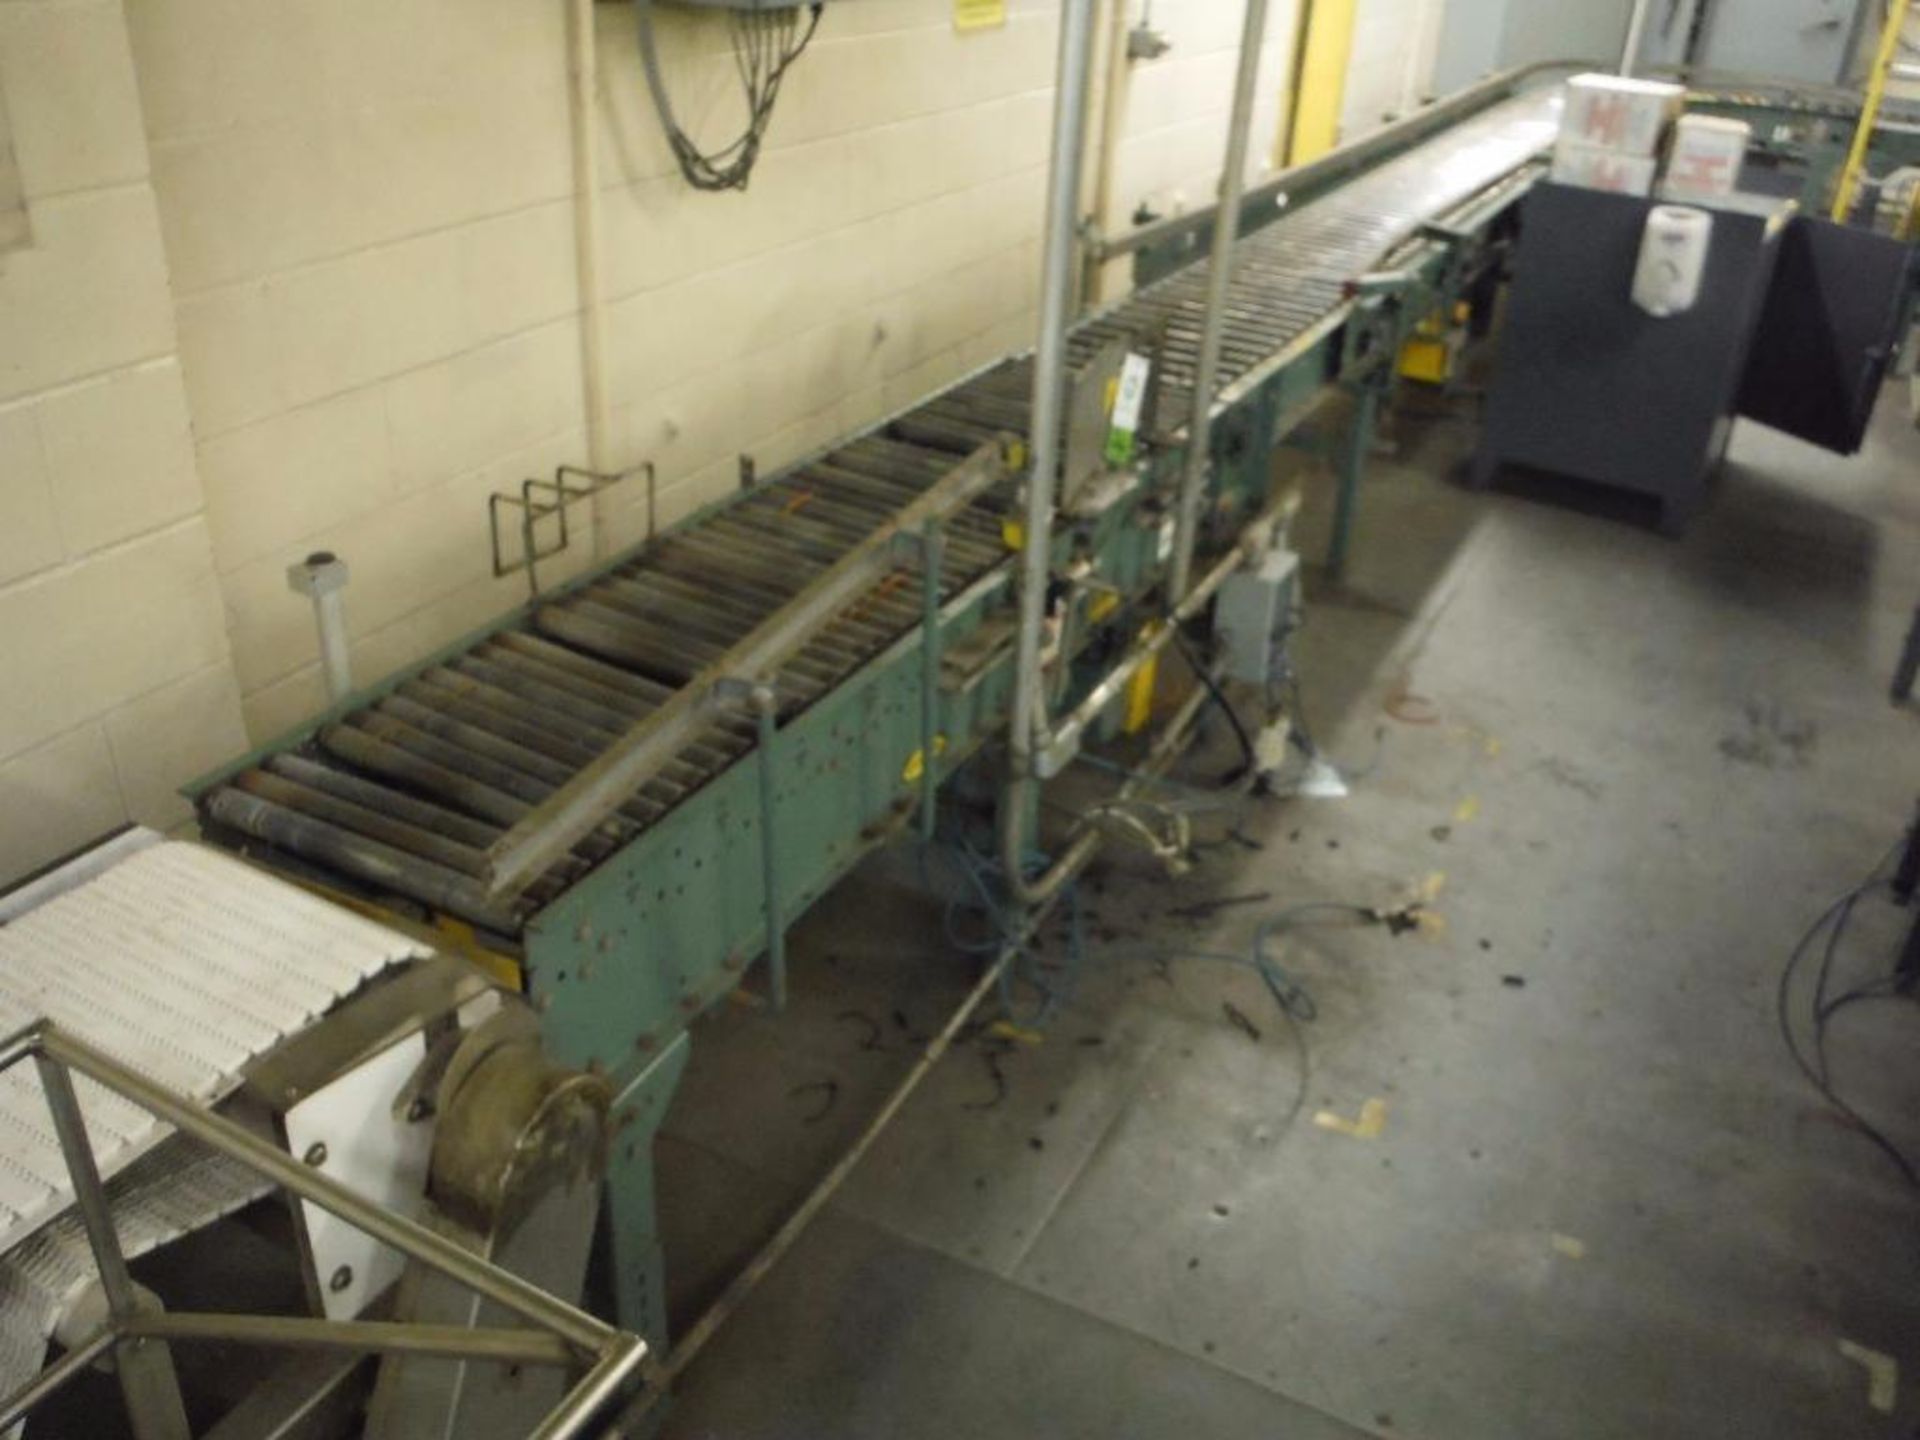 Hytrol powered roller conveyor, 126 ft. long x 15 in. wide, with (2) 90 degree turns, motors and